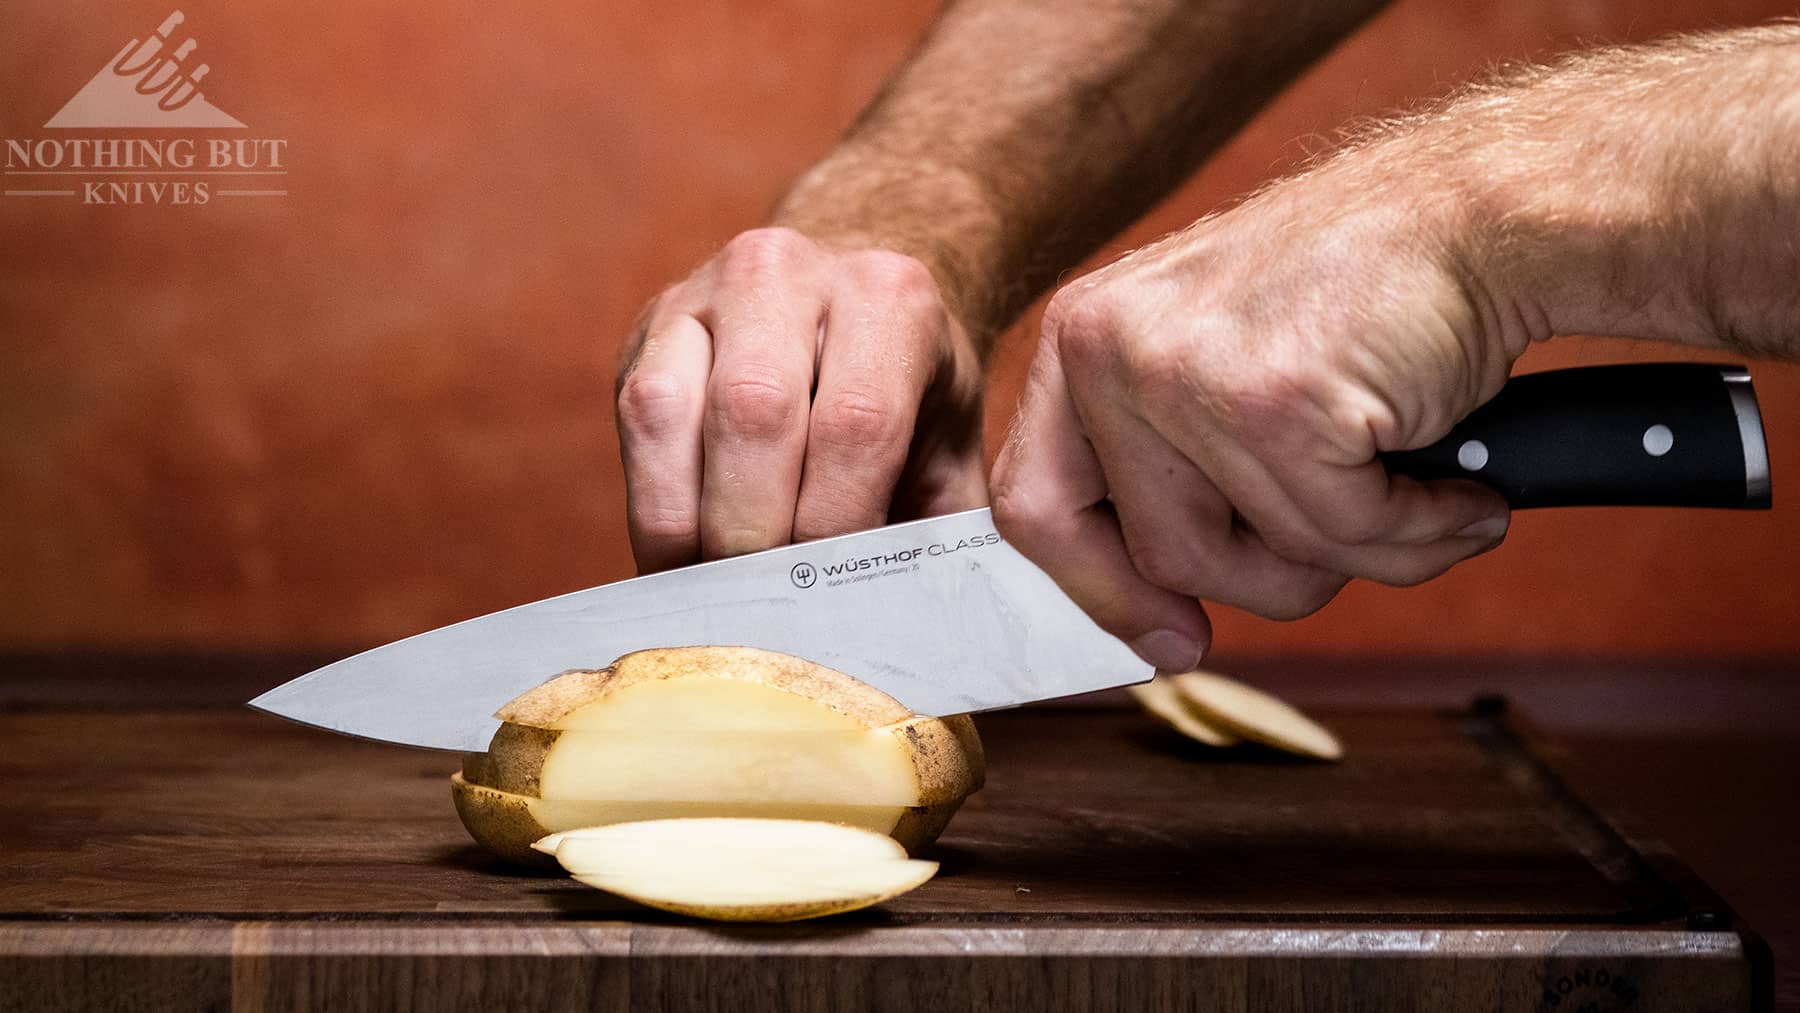 https://www.nothingbutknives.com/wp-content/uploads/2022/08/Slicing-A-Potato-With-The-Wusthof-Classic-Ikon-Chef-Knife.jpg